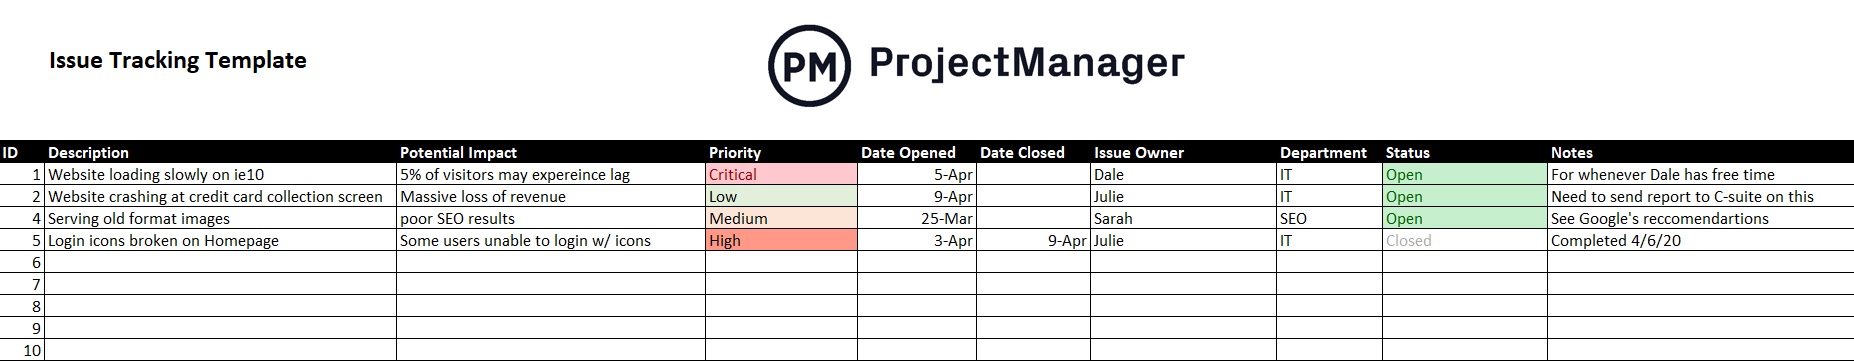 ProjectManager's issue-tracking template